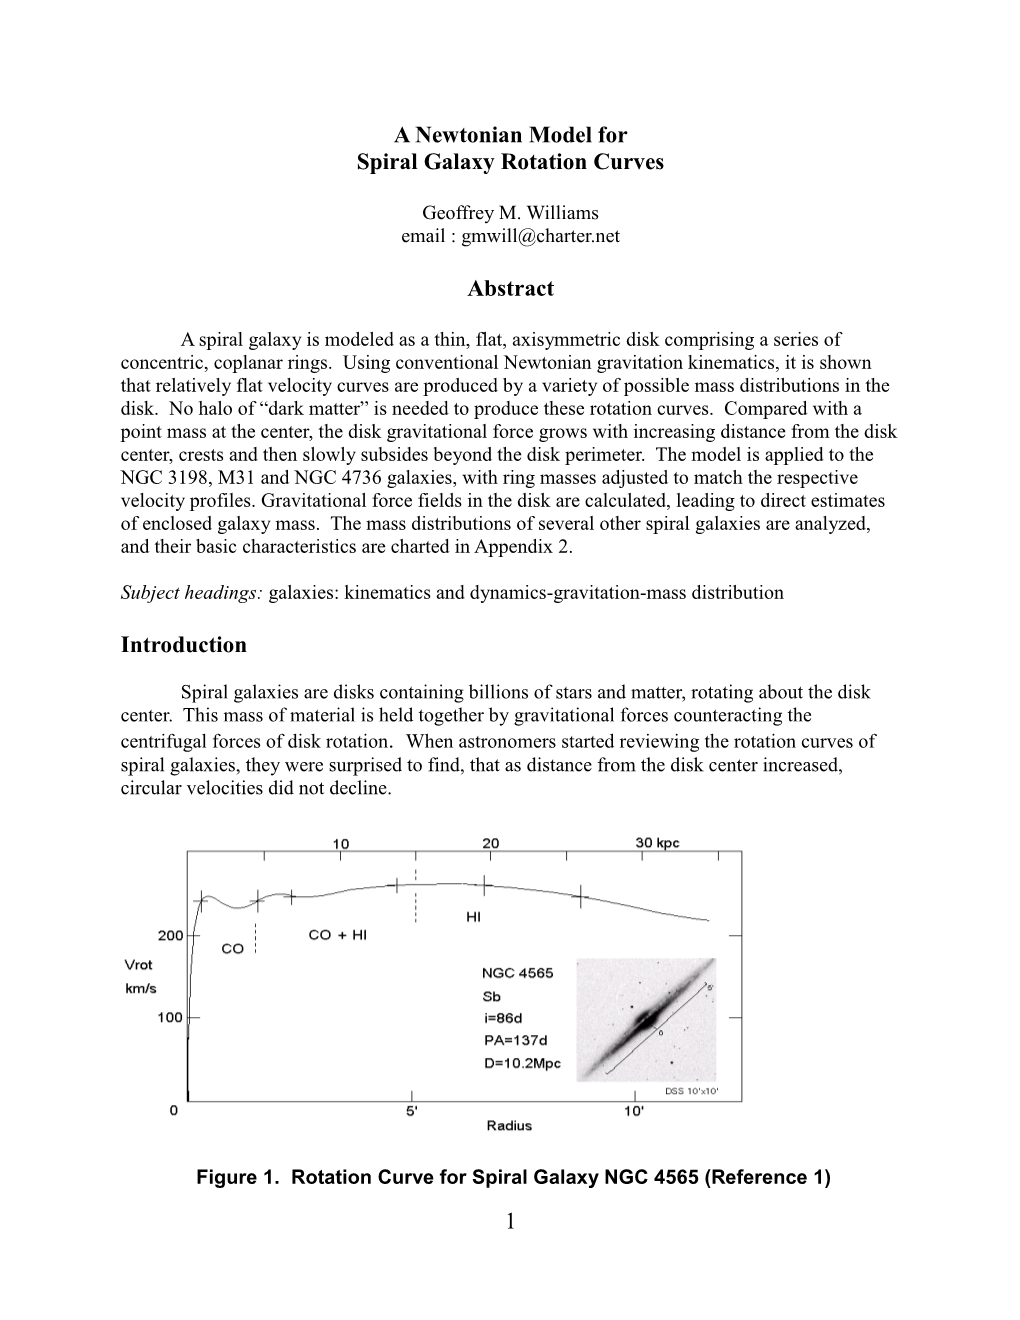 A Newtonian Model for Spiral Galaxy Rotation Curves